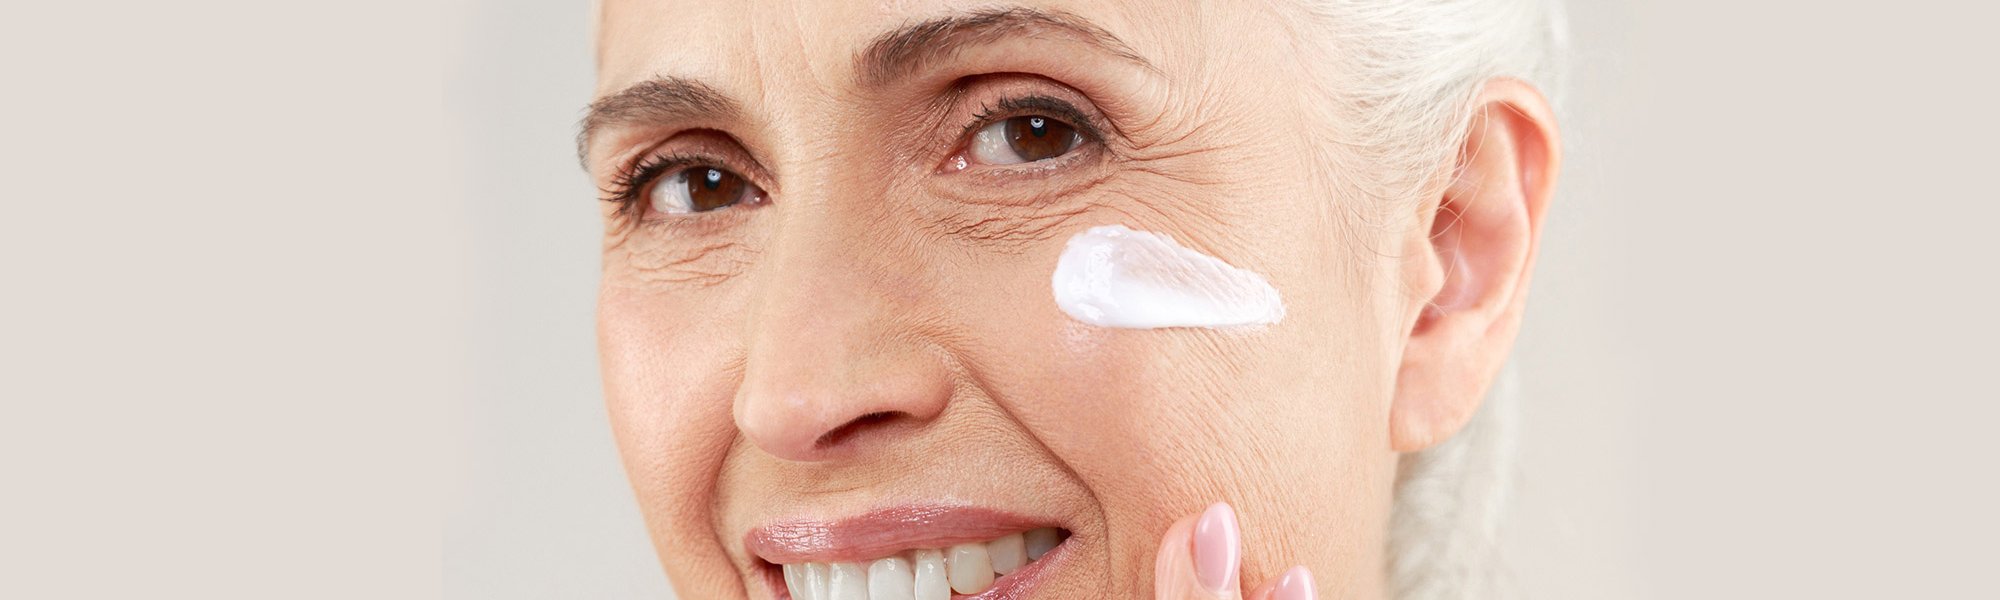 The Best Anti Aging Cream Skin Care For You